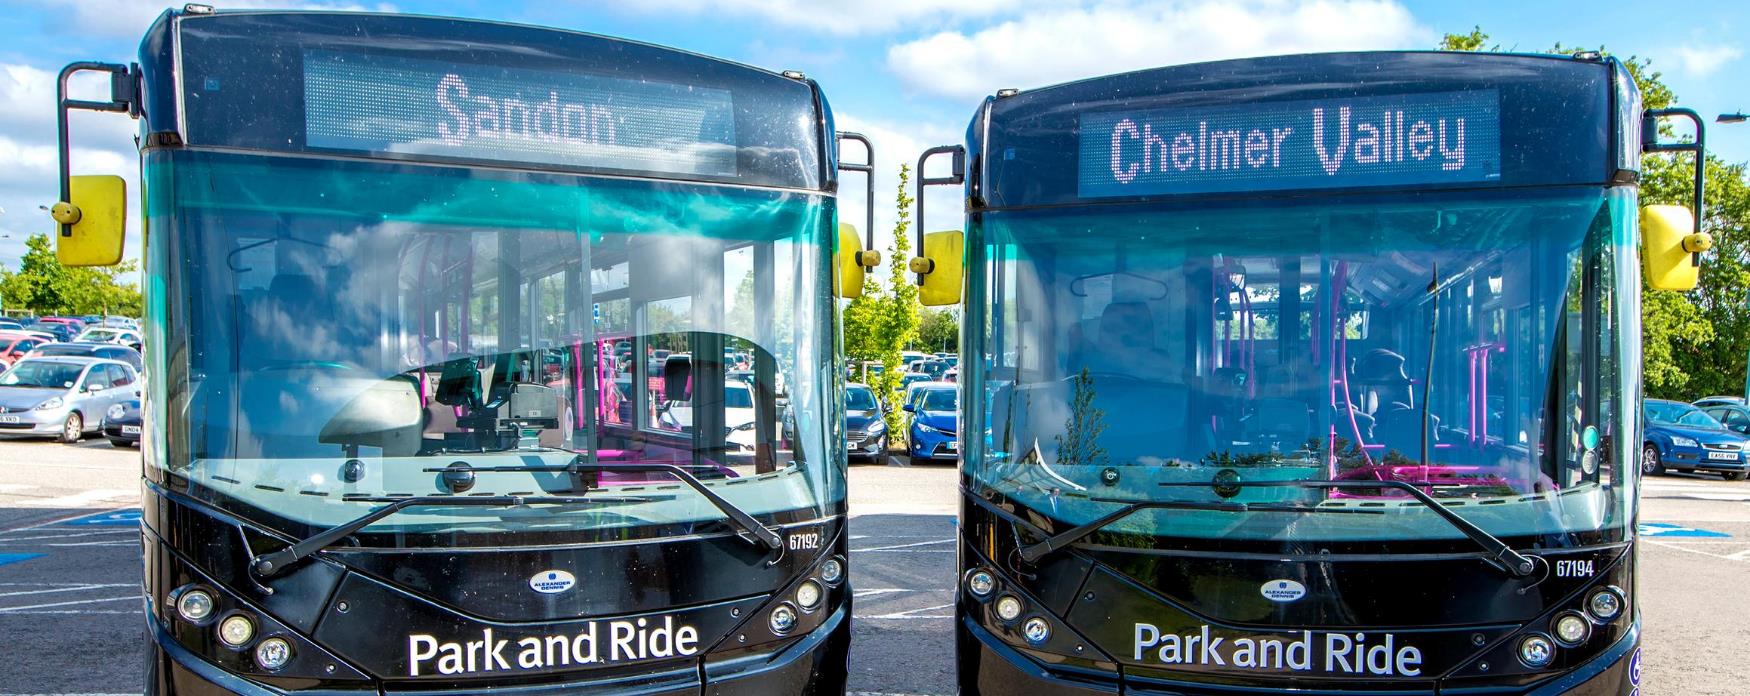 Two park and ride buses in Chelmsford